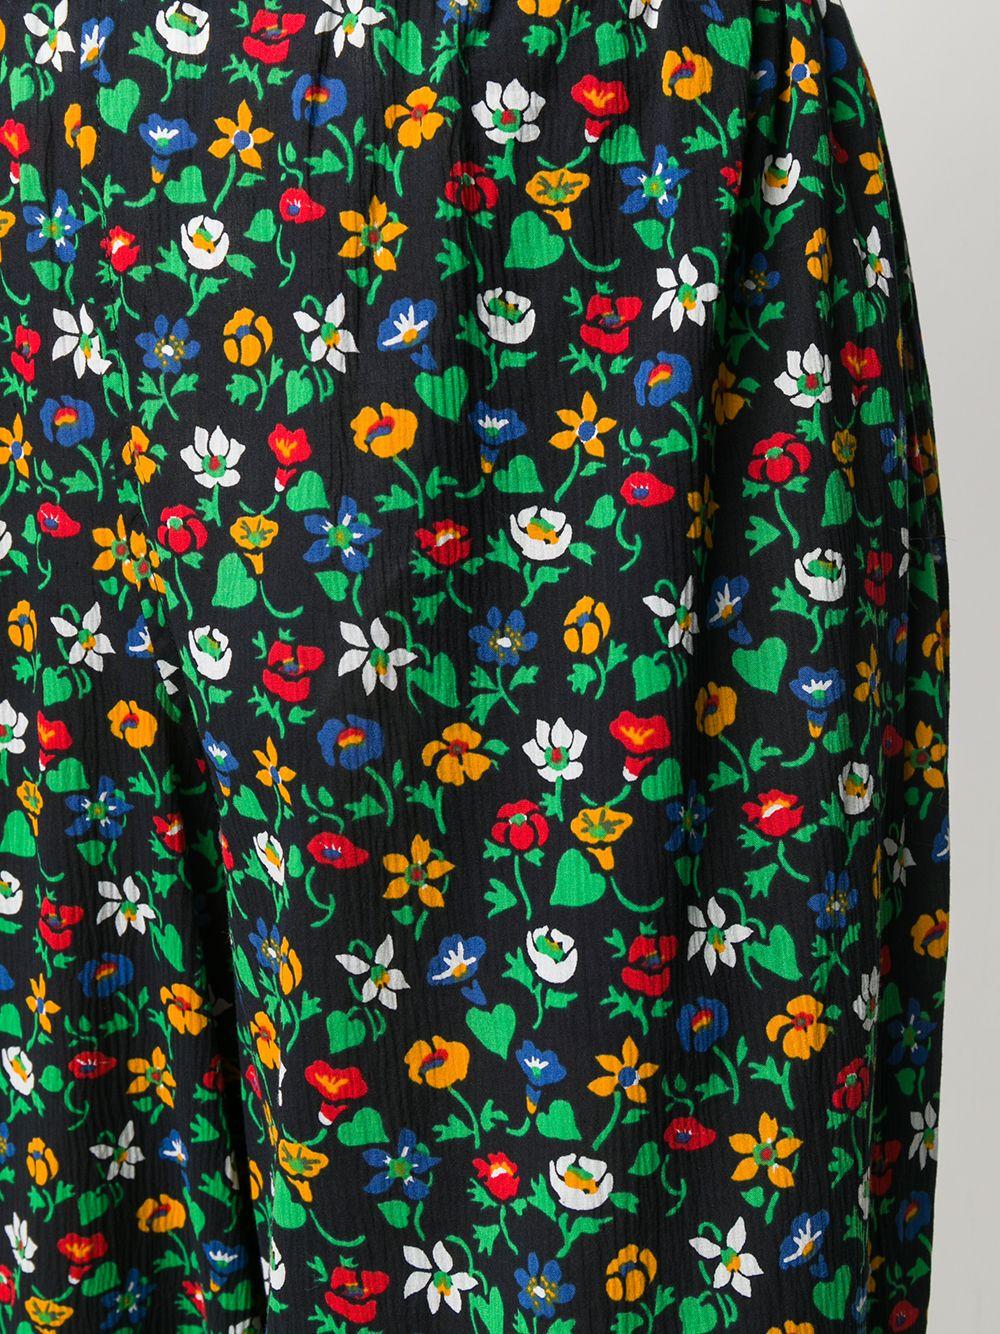  1977s Saint Laurent Rive Gauche, Collection Printemps-Eté 1977 cotton sarouel featuring a mid length,  floral print, an elasticated waistband, elasticated bottoms legs.  
In good vintage condition. 
Made in France. 
Estimated size 36fr/ US4/ UK8
We